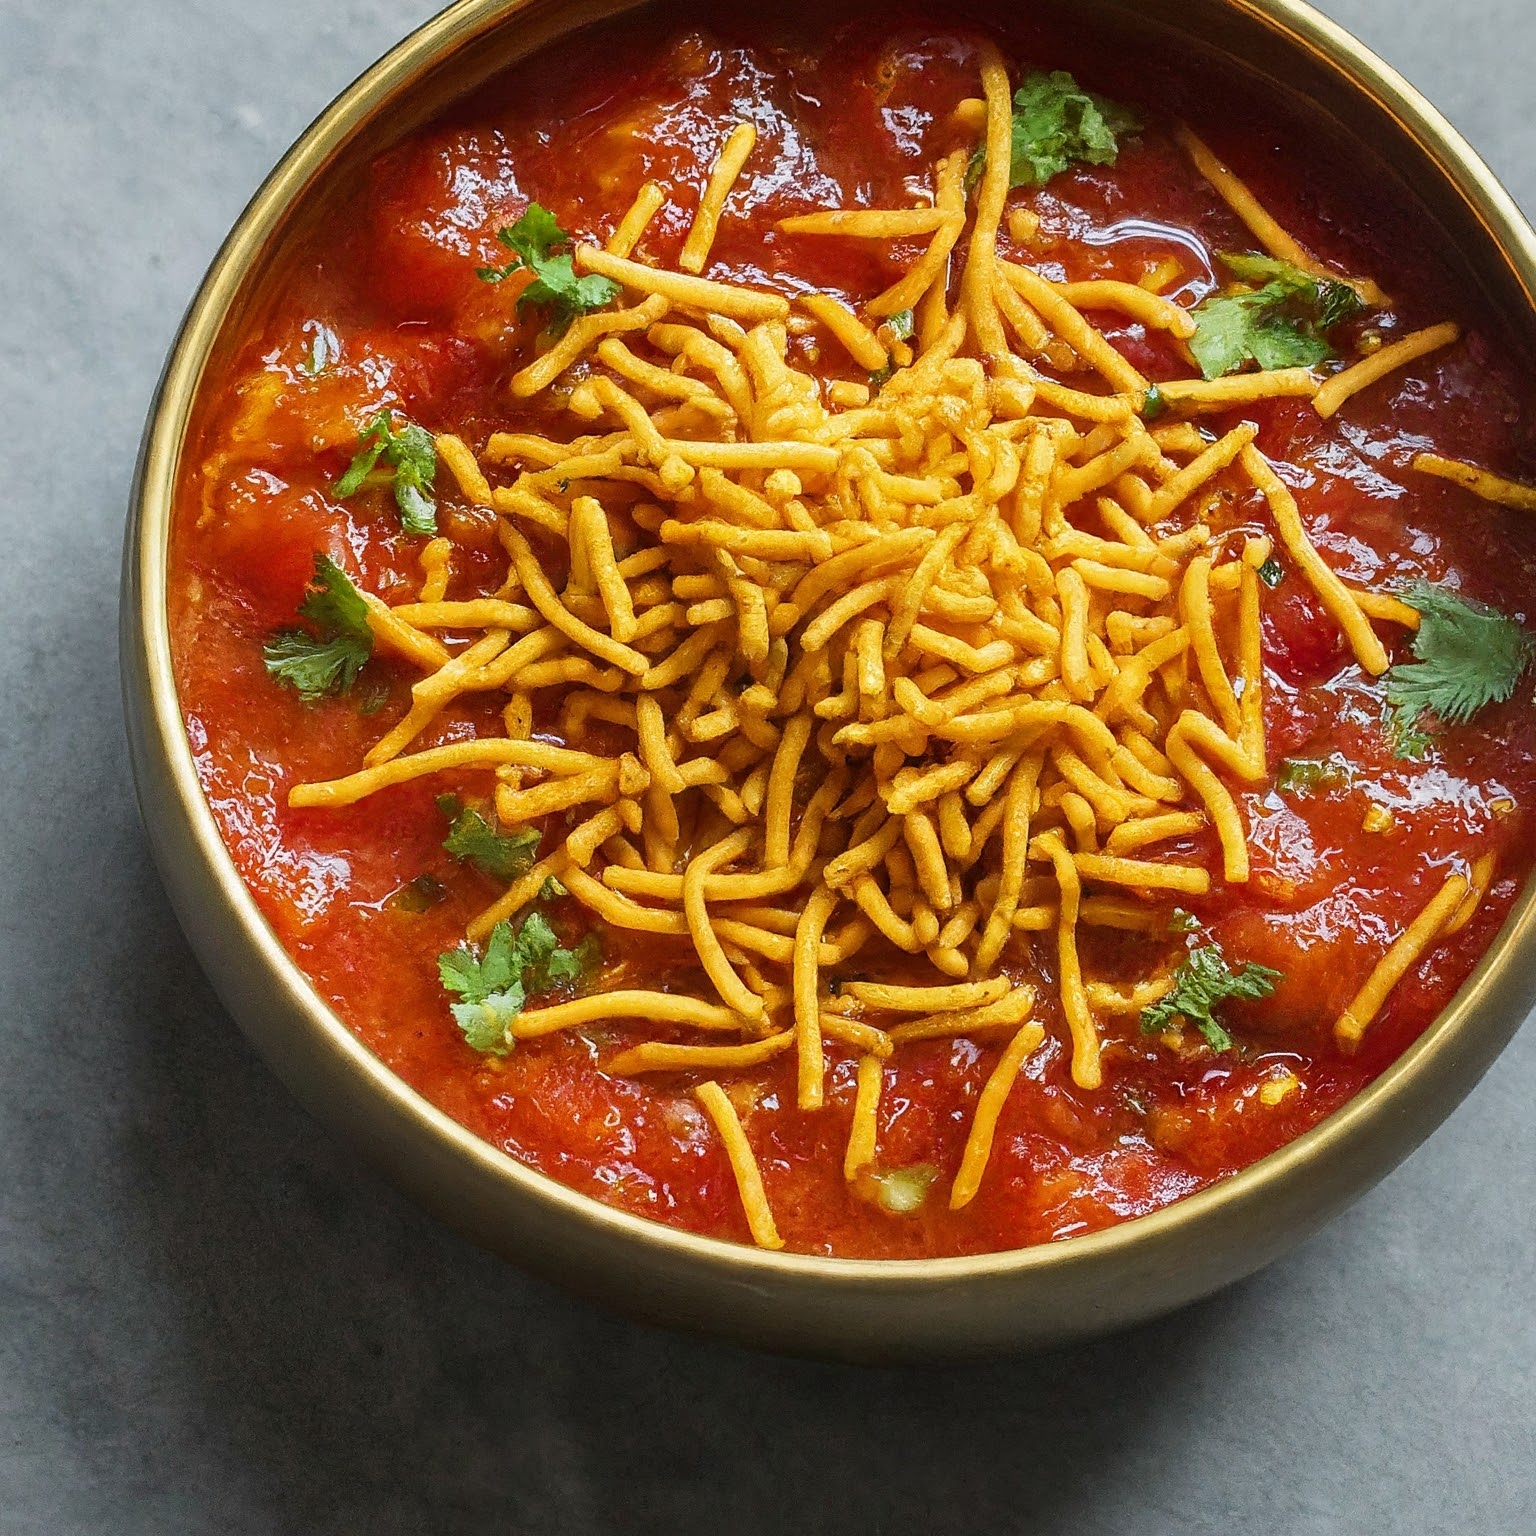 A round bowl filled with Gujarati Sev Tameta Nu Shaak, a tomato and sev noodle dish garnished with cilantro.